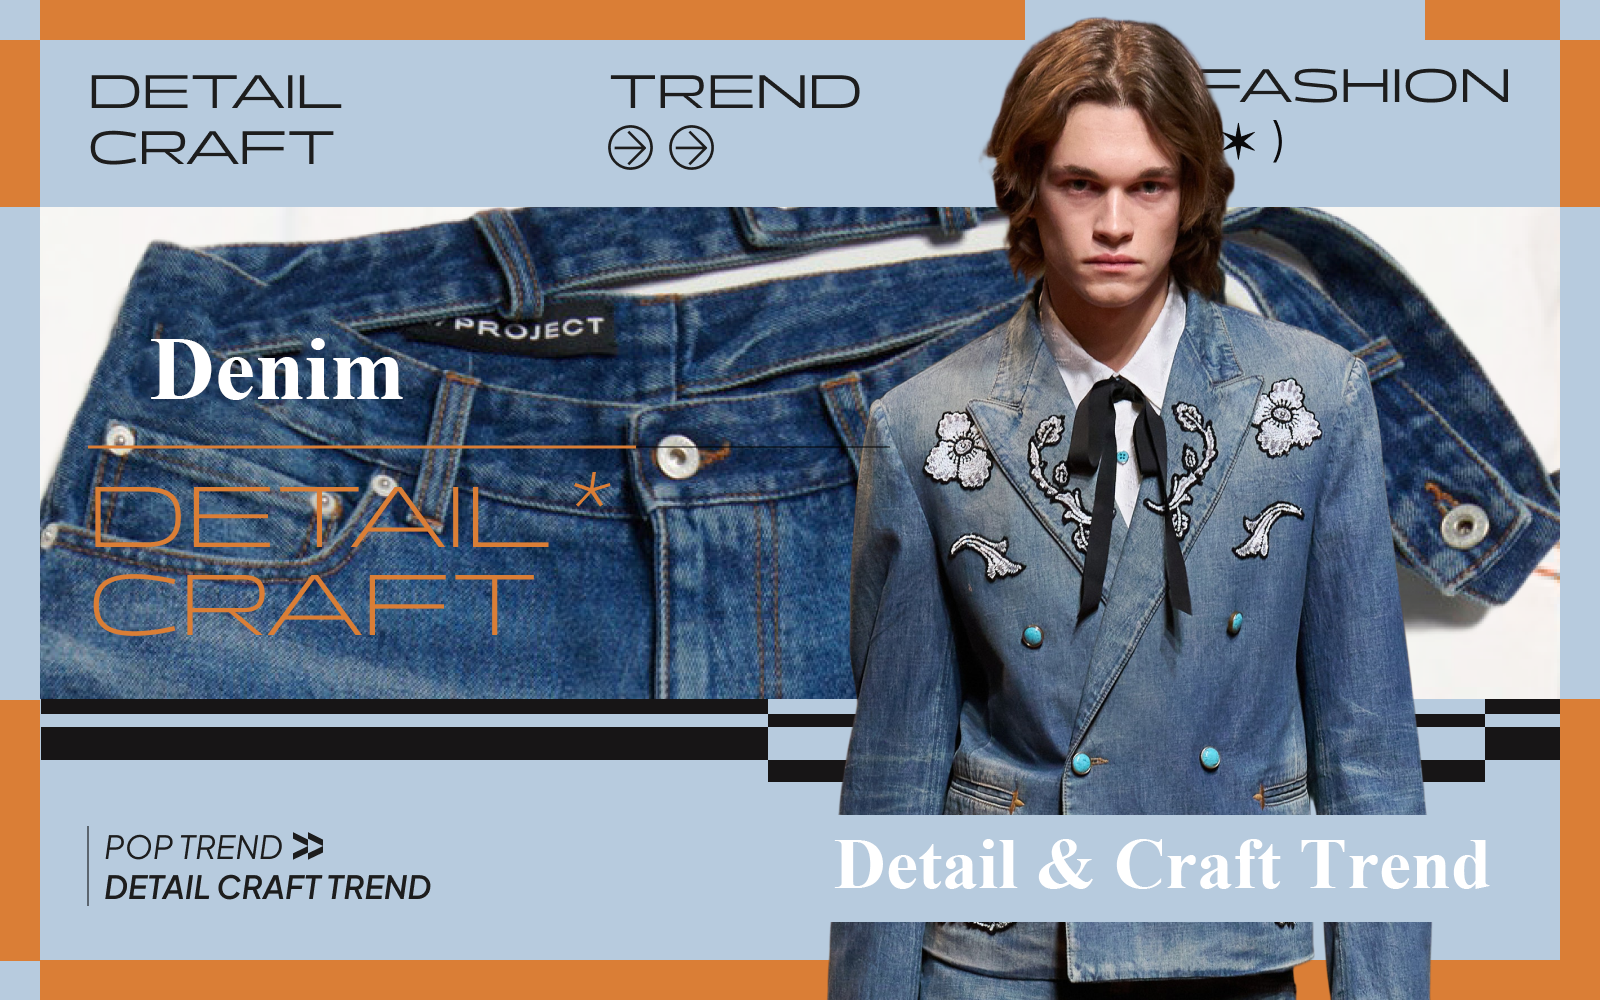 The Craft & Detail Trend for Denim Clothing